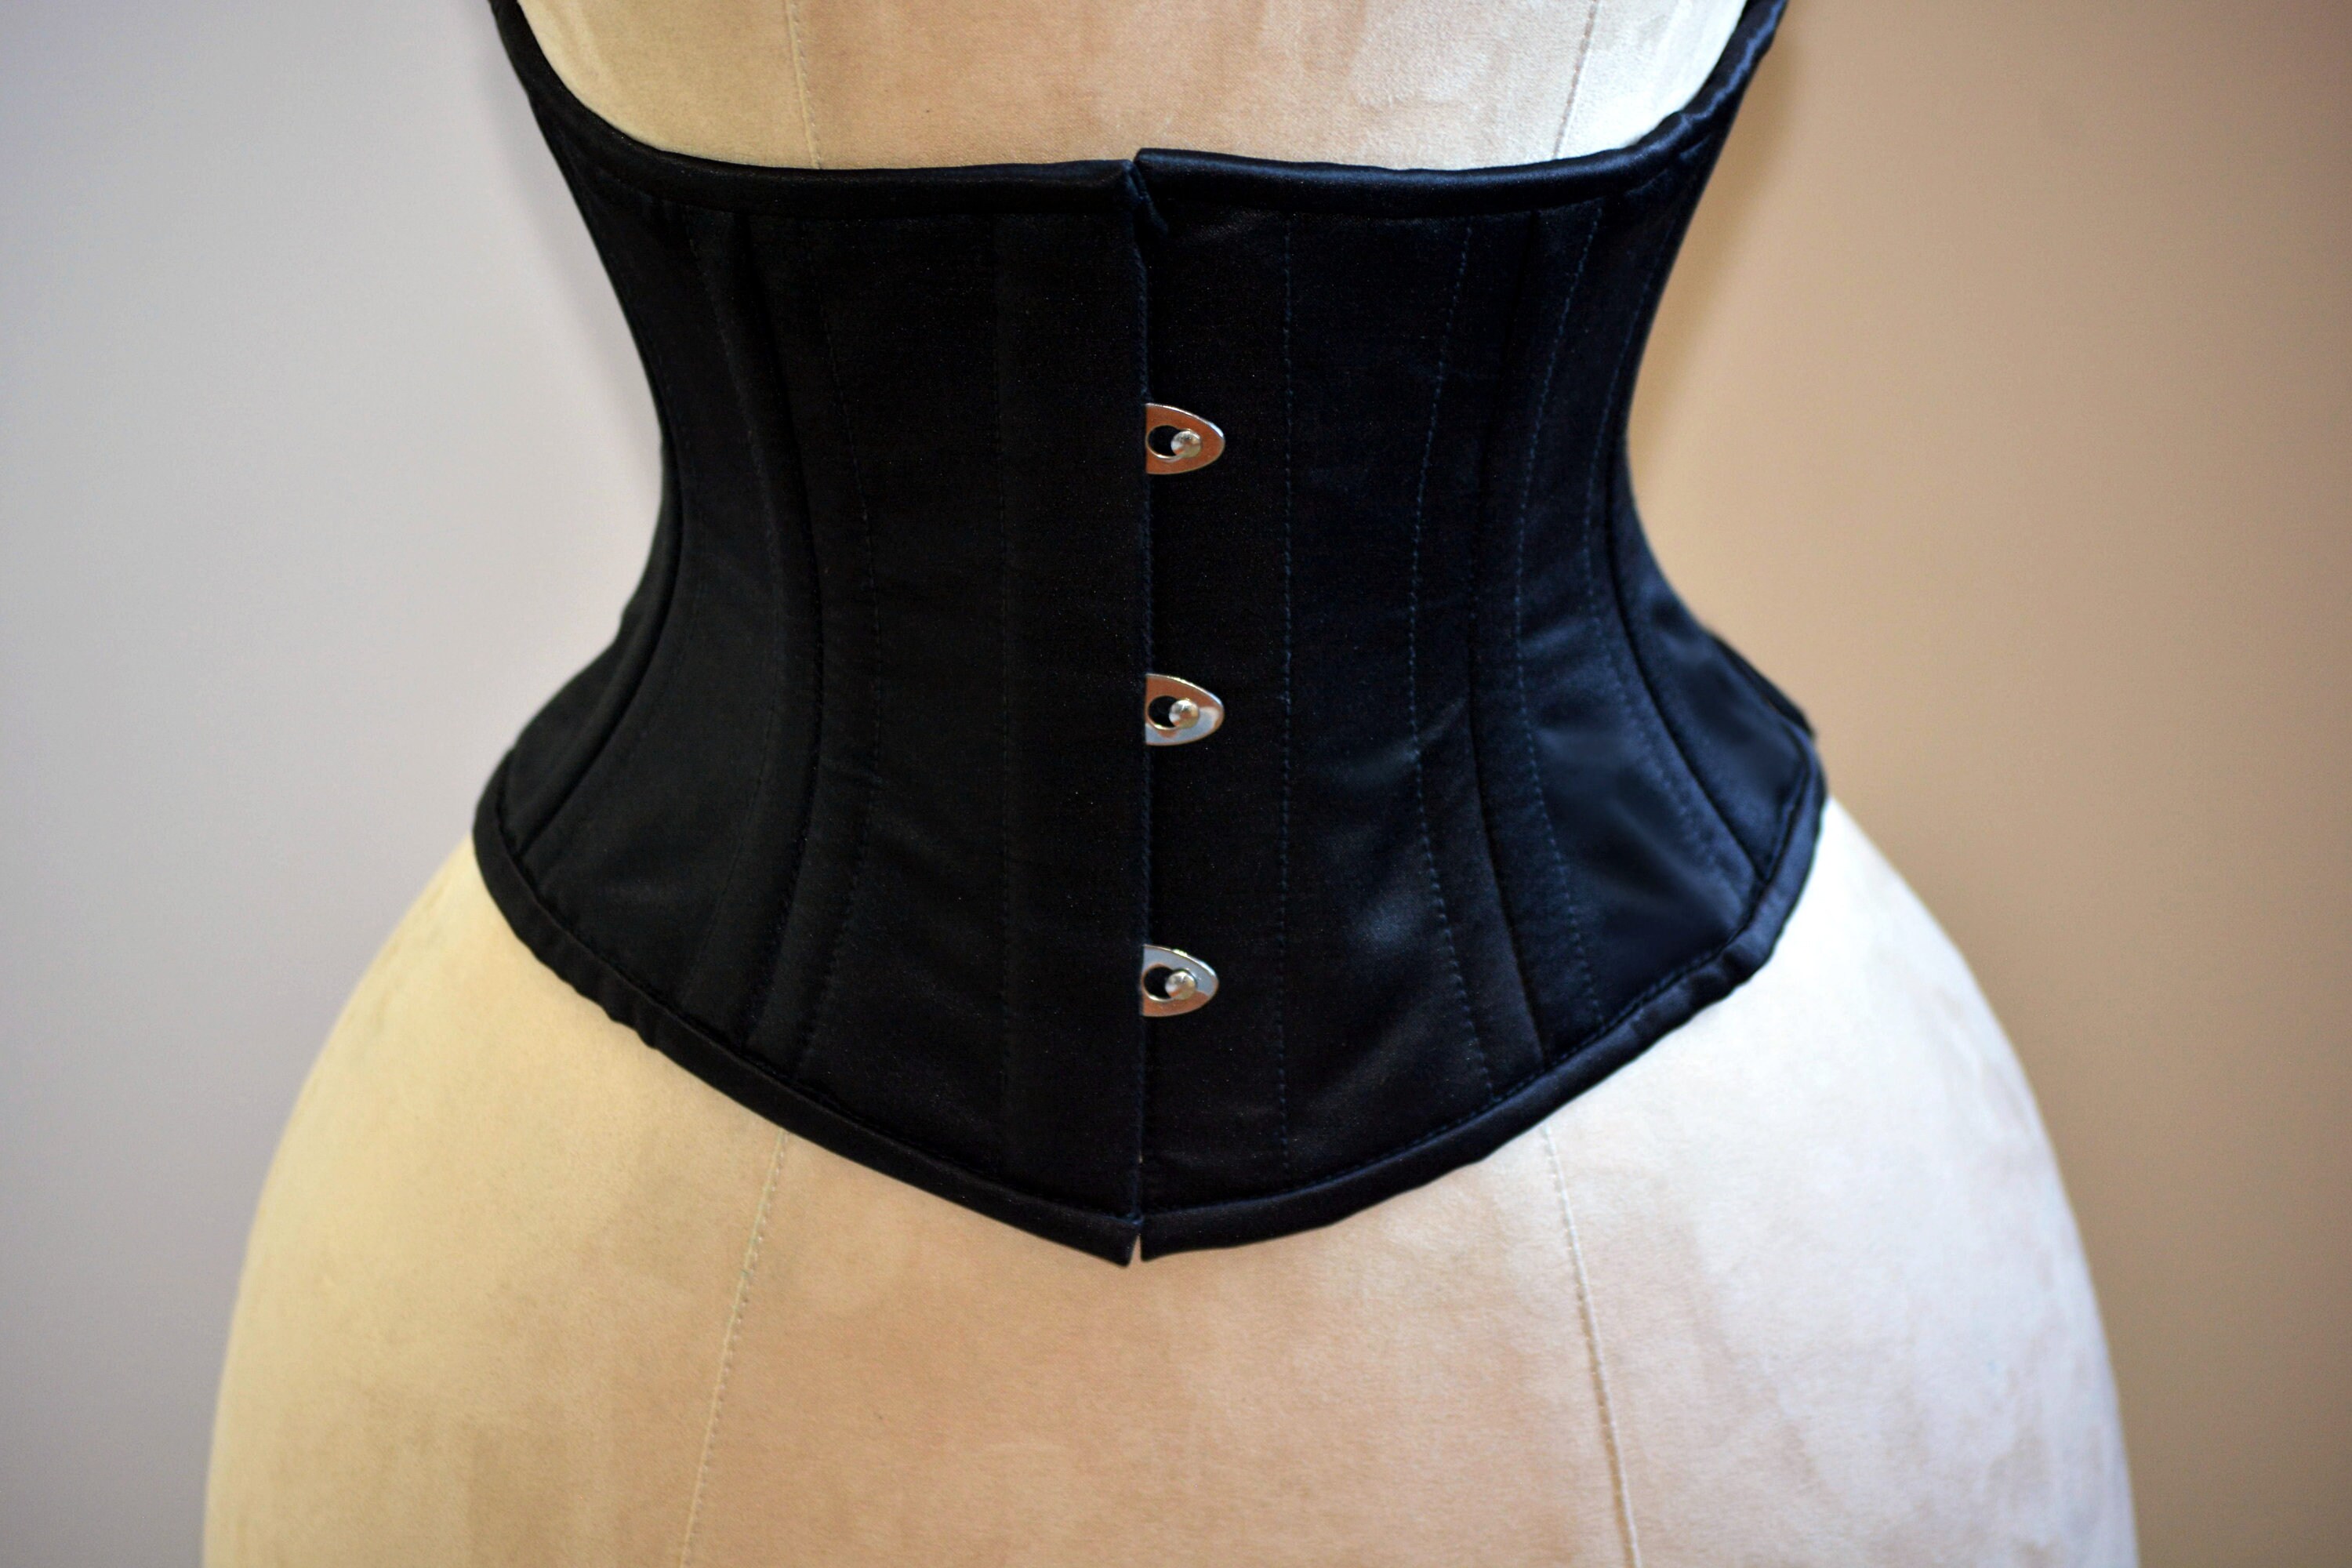 Buy The Set of Black 3 Best Sellers Corsets: Waspie and Black Mesh  Underbust Corsets. Real Waist Training Corset for Tight Lacing. Online in  India 